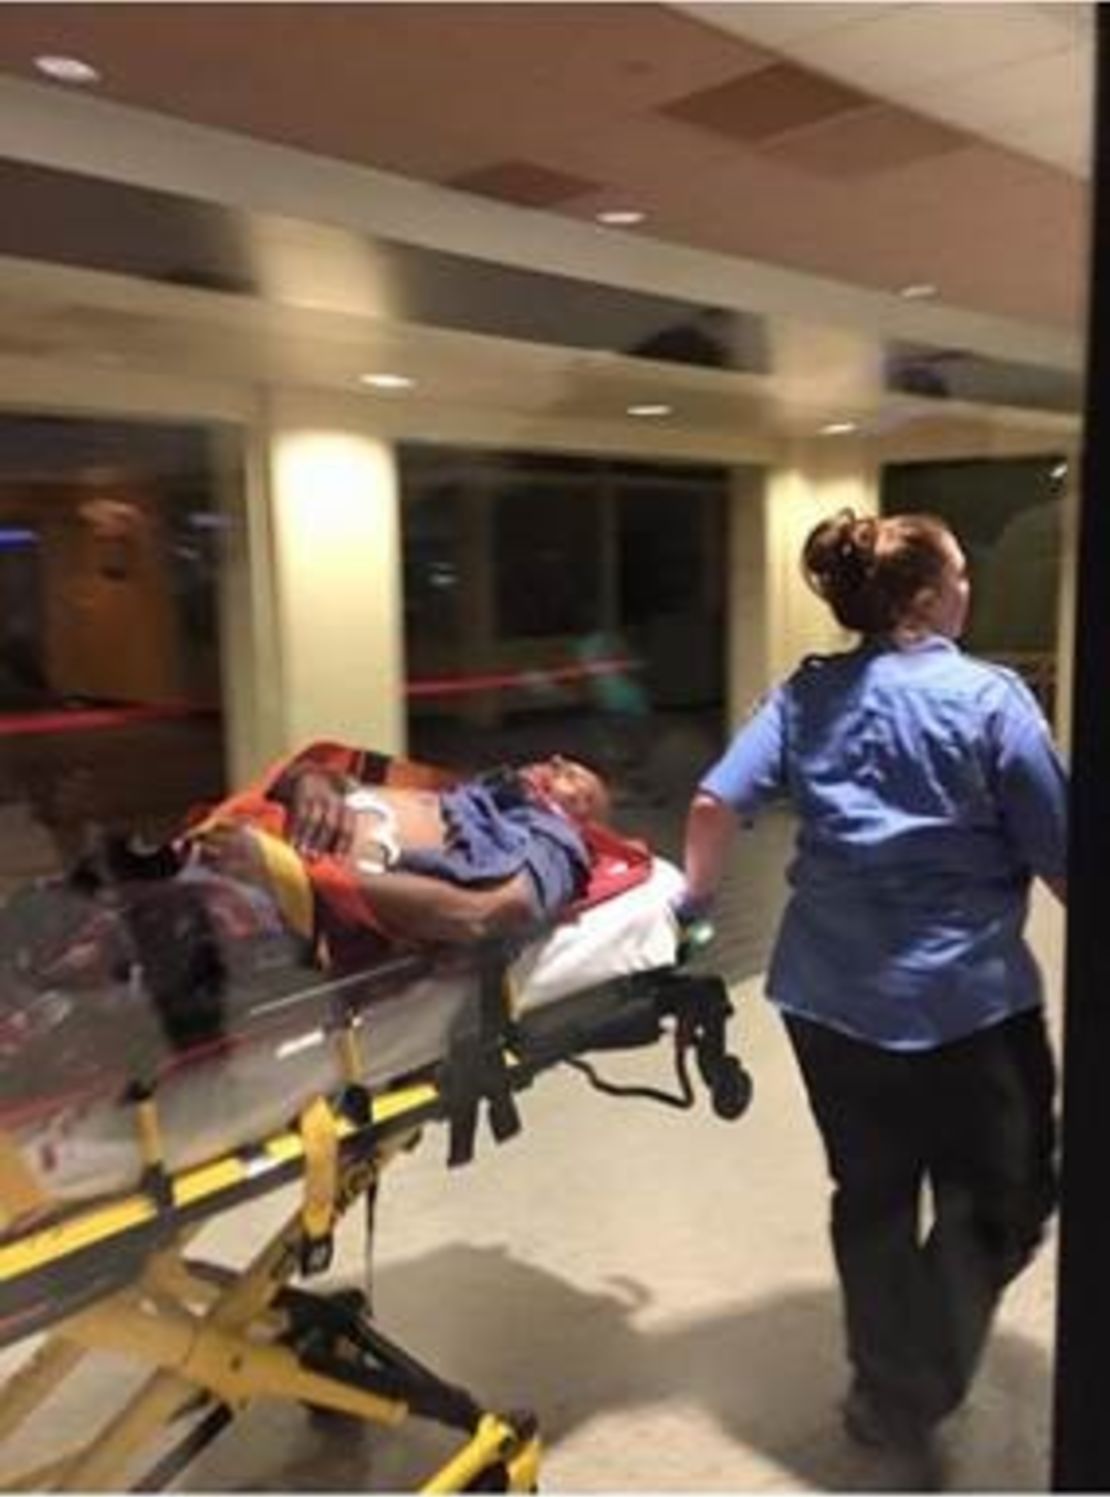 The suspect in the attack on TSA agents at the New Orleans-area airport is taken away on a stretcher.